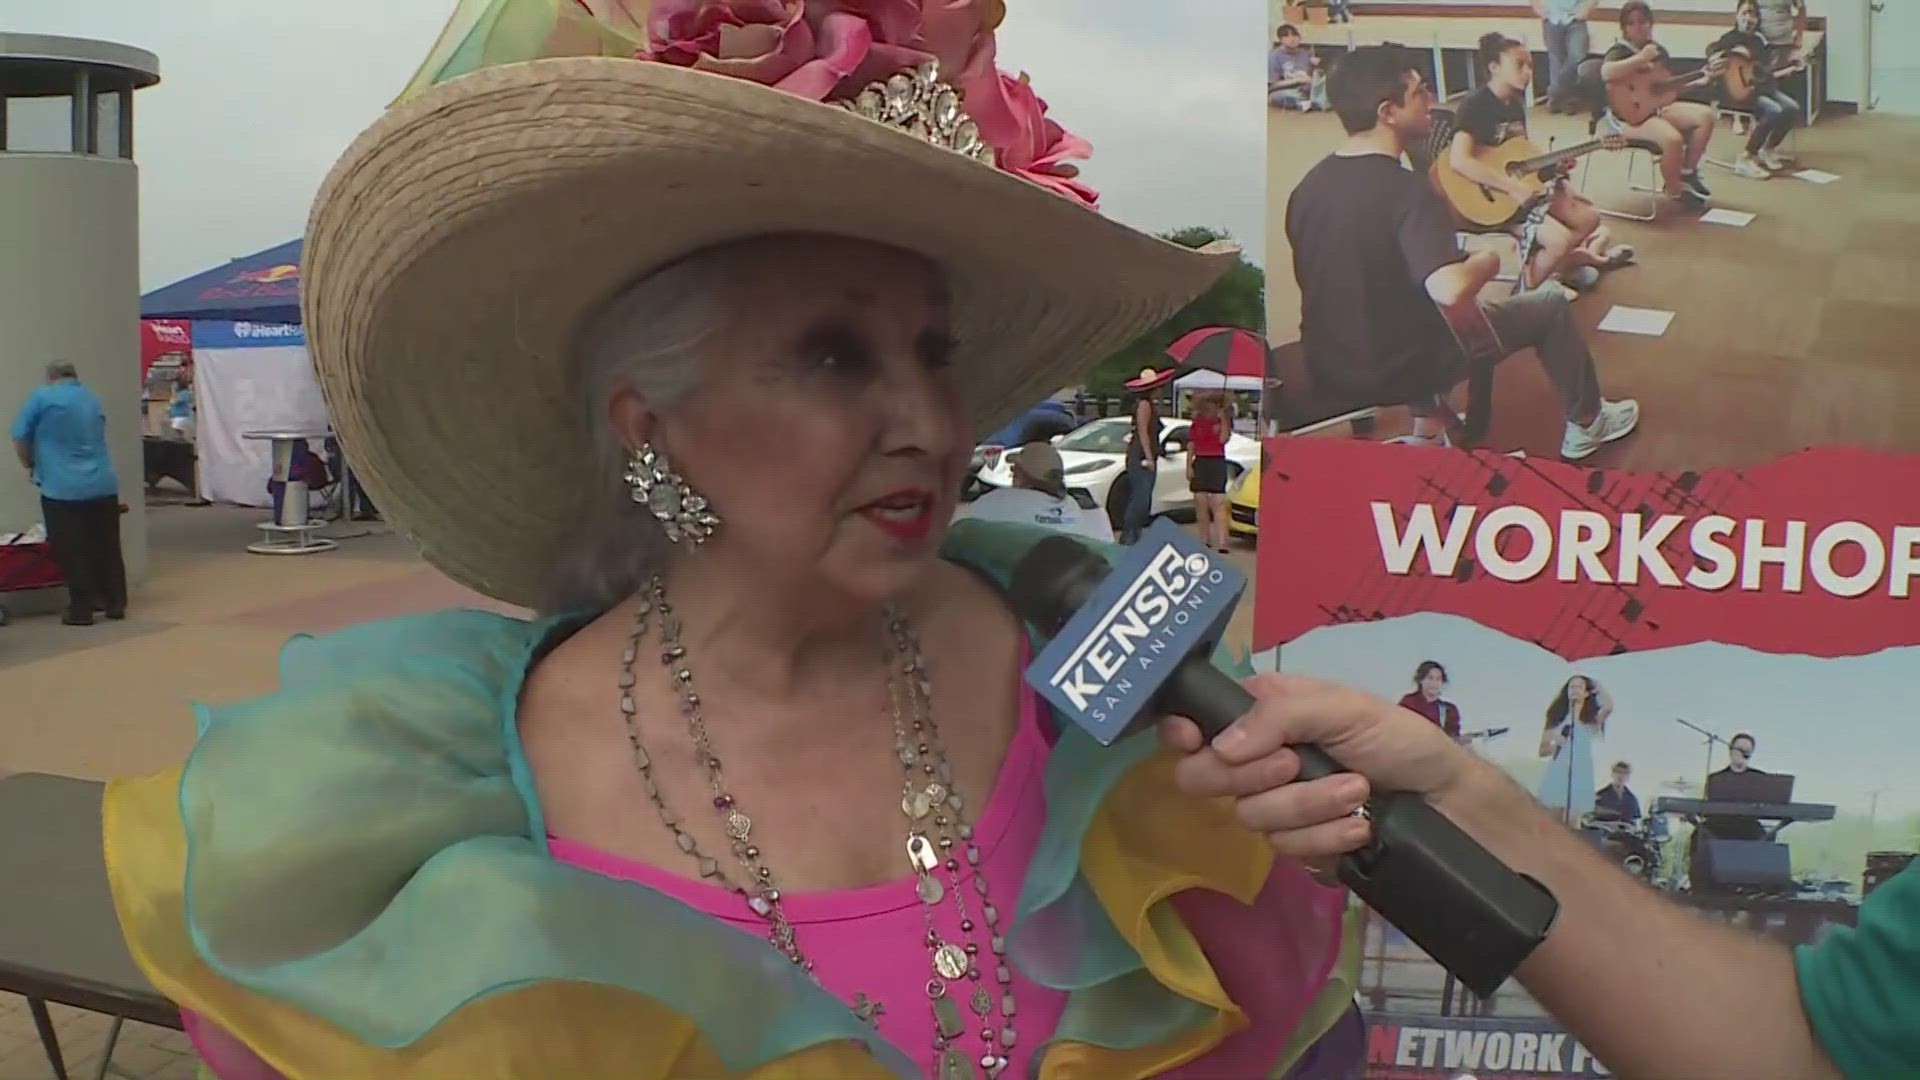 Fiesta is officially here! KENS 5 Jeremy Baker is live from Fiesta Fiesta happening at the Alamodome.